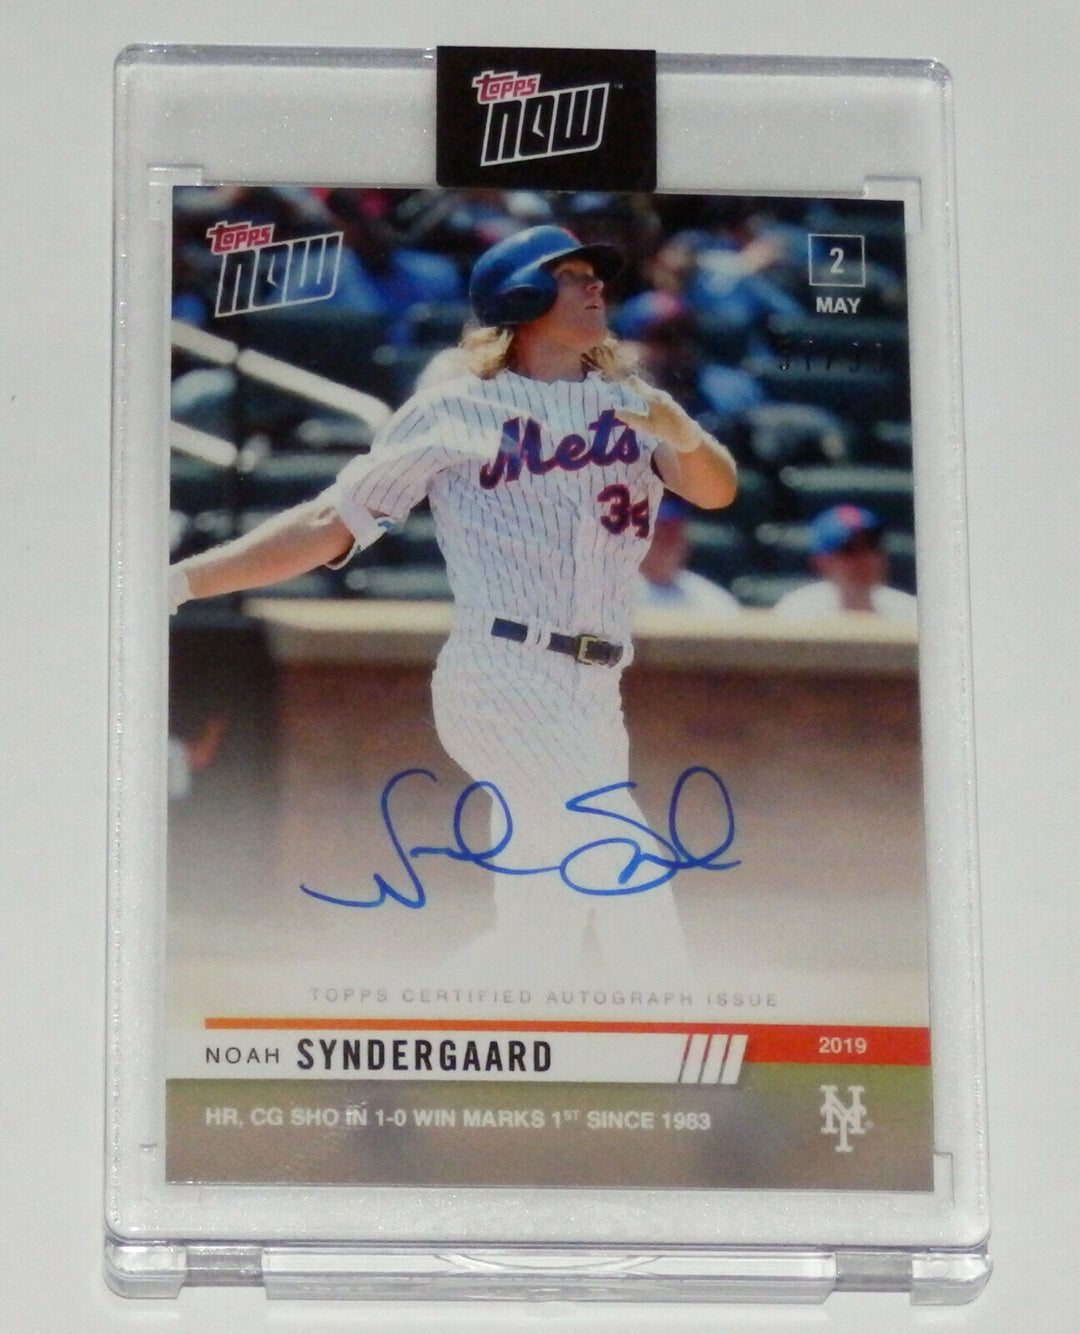 NOAH SYNDERGAARD SIGNED HOMERUN + COMPLETE GAME SHUTOUT WIN TOPPS NOW CARD #166A Image 3